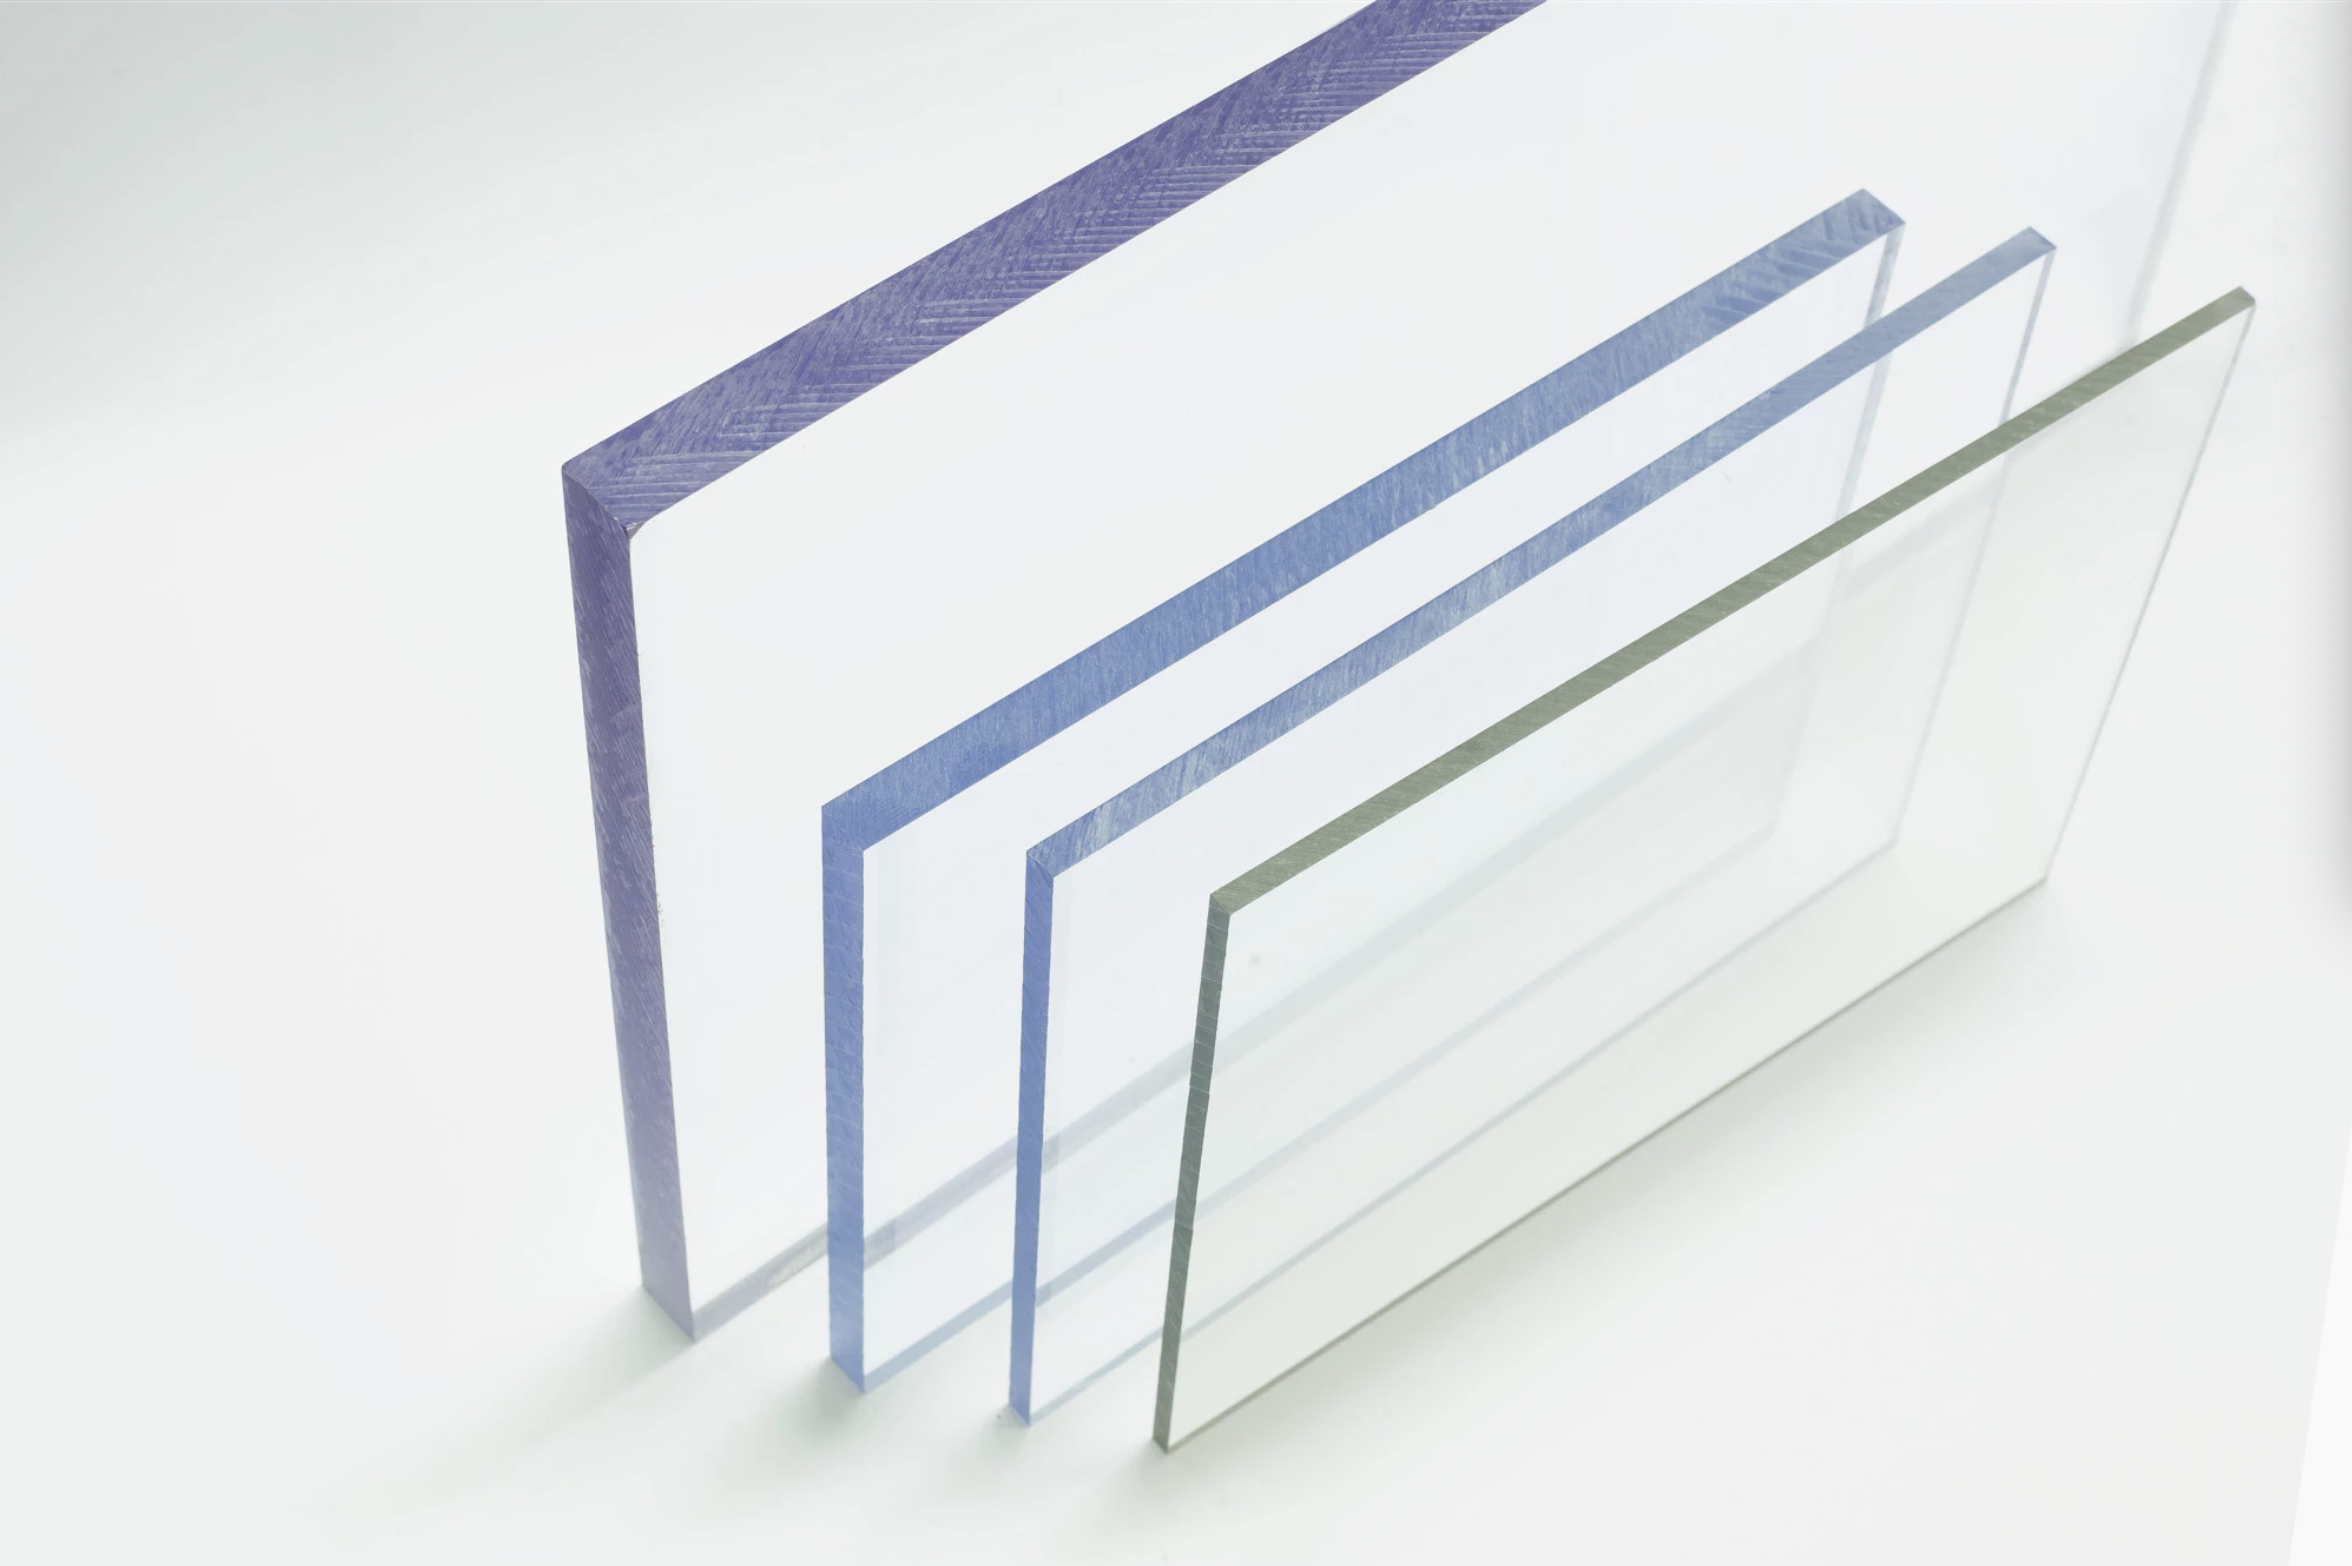 Ways to distinguish polycarbonate from acrylic